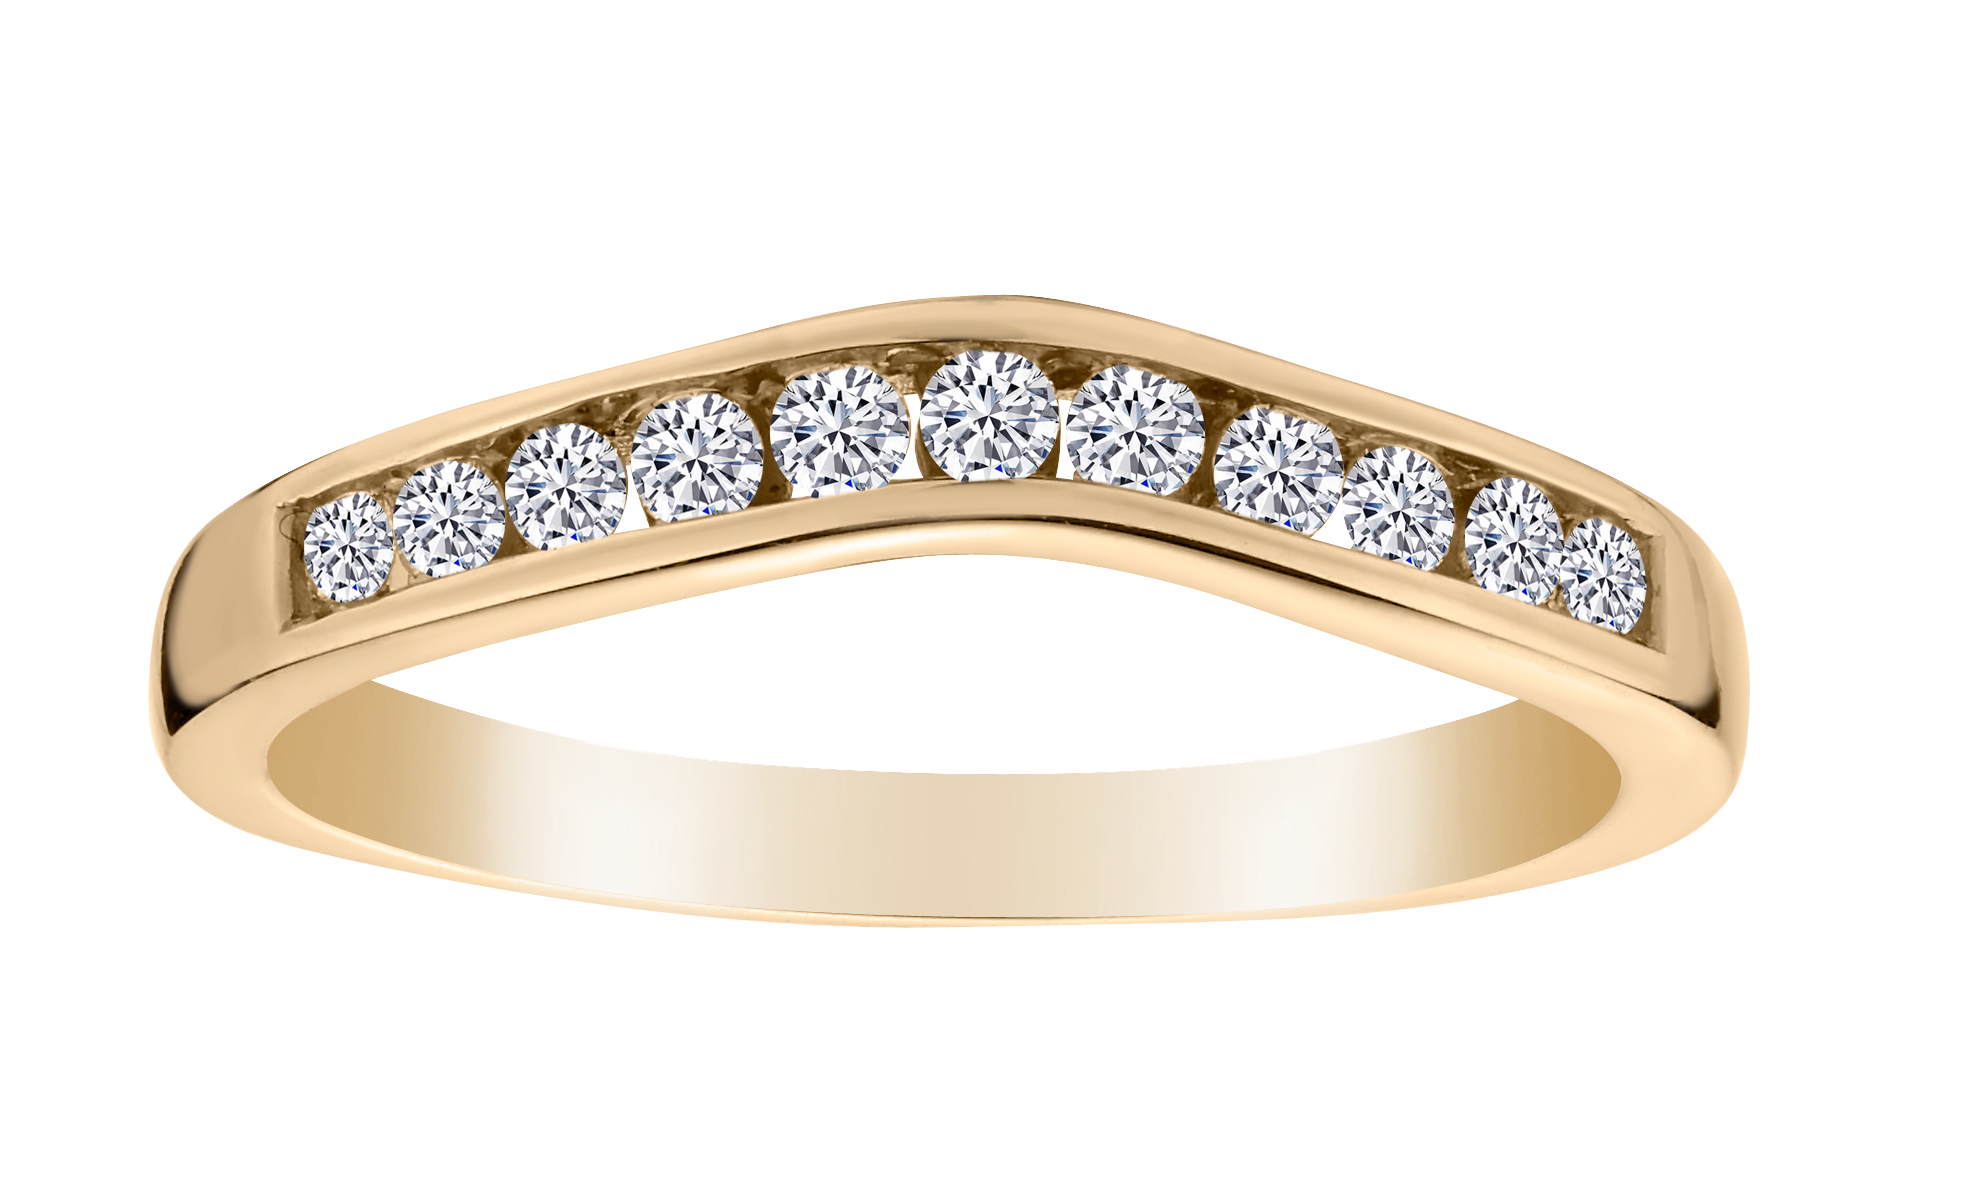 .25 Carat "Contoured" Diamond Band Ring, 10kt Yellow Gold. Fashion Rings. Griffin Jewellery Designs